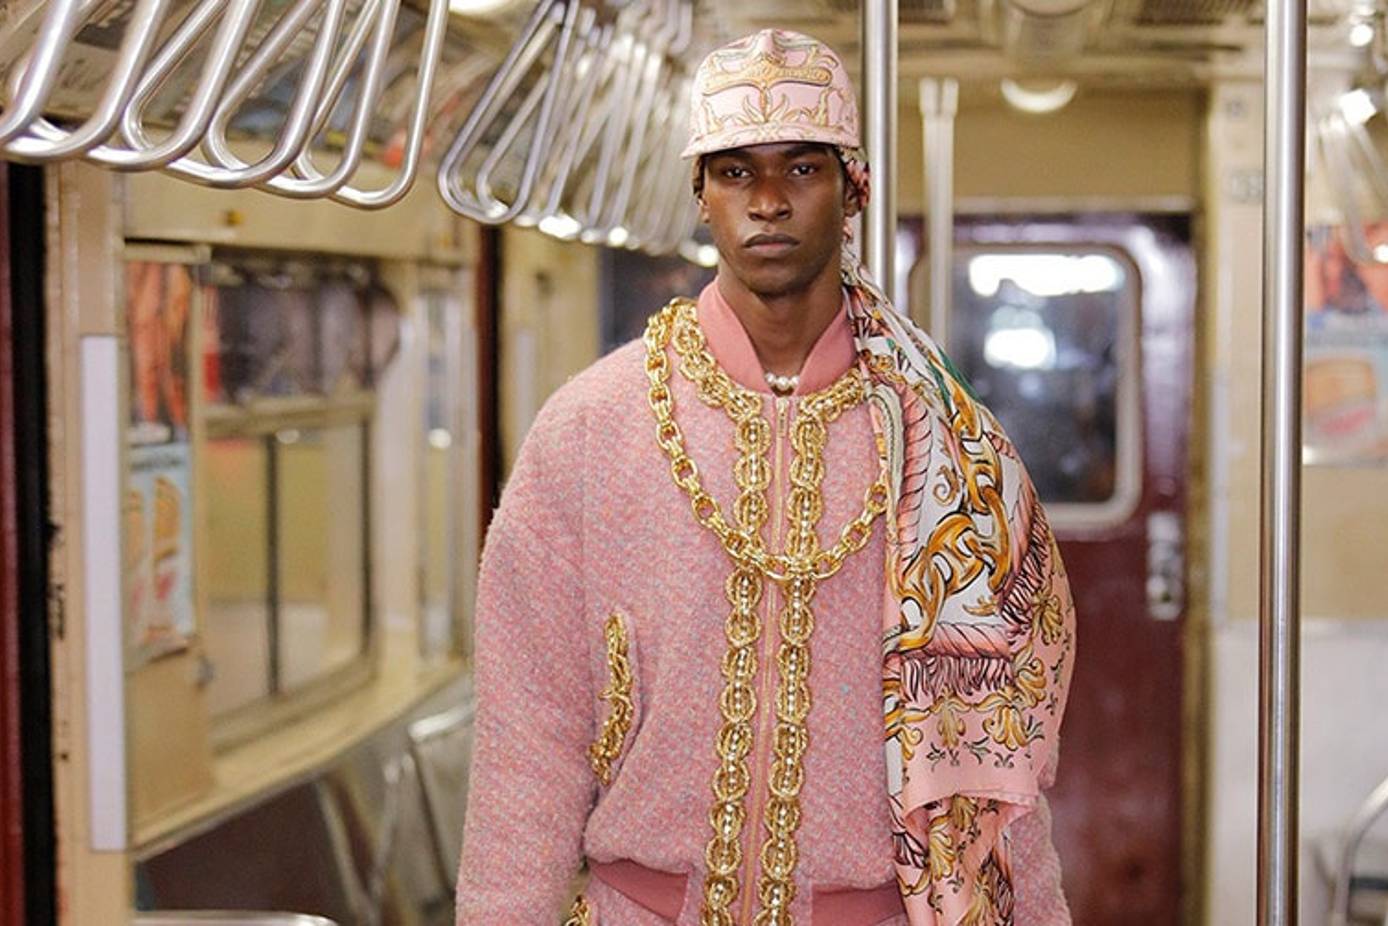 Pre Fall 2020: Moschino goes super size on New York subway